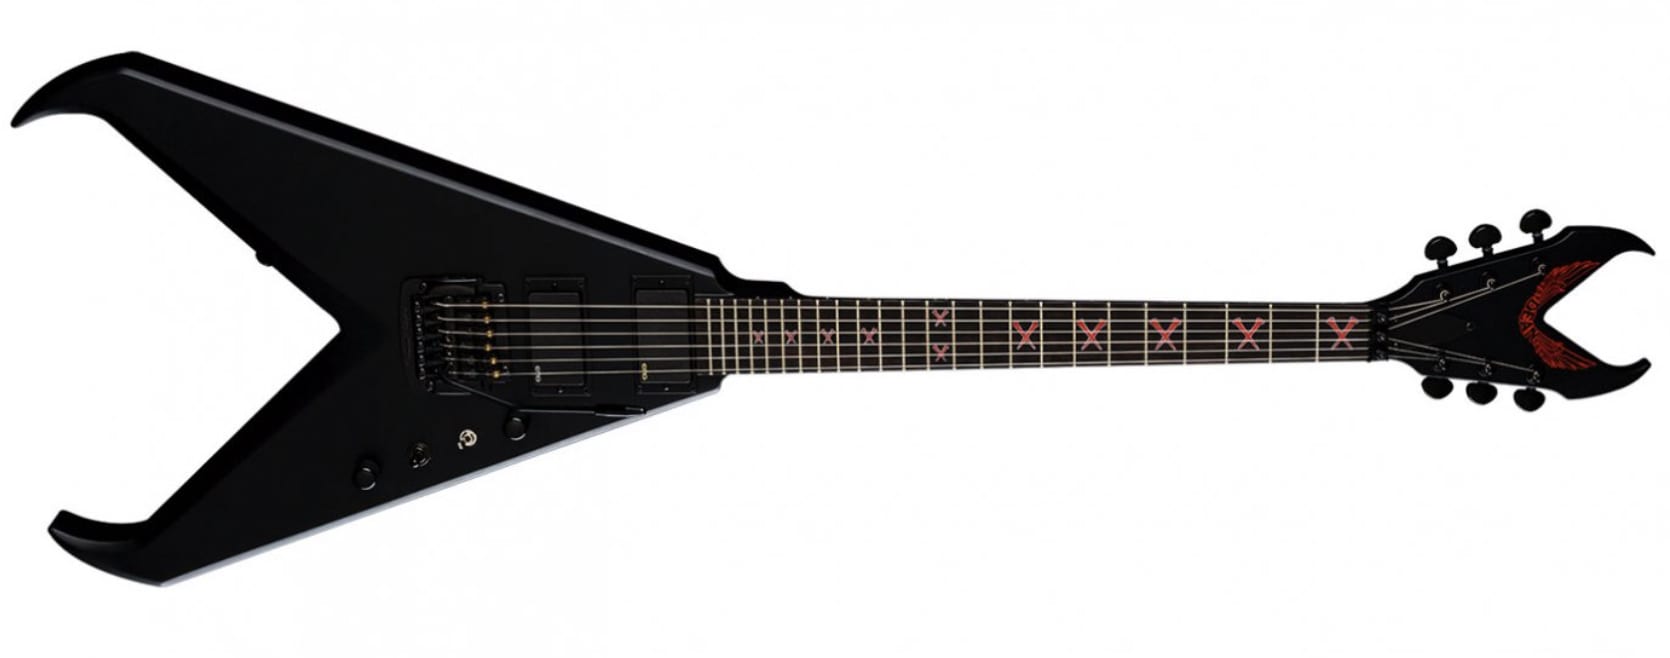 New Dean Kerry King SIgnature V has simialr specifications to the US made limited edition from 2019